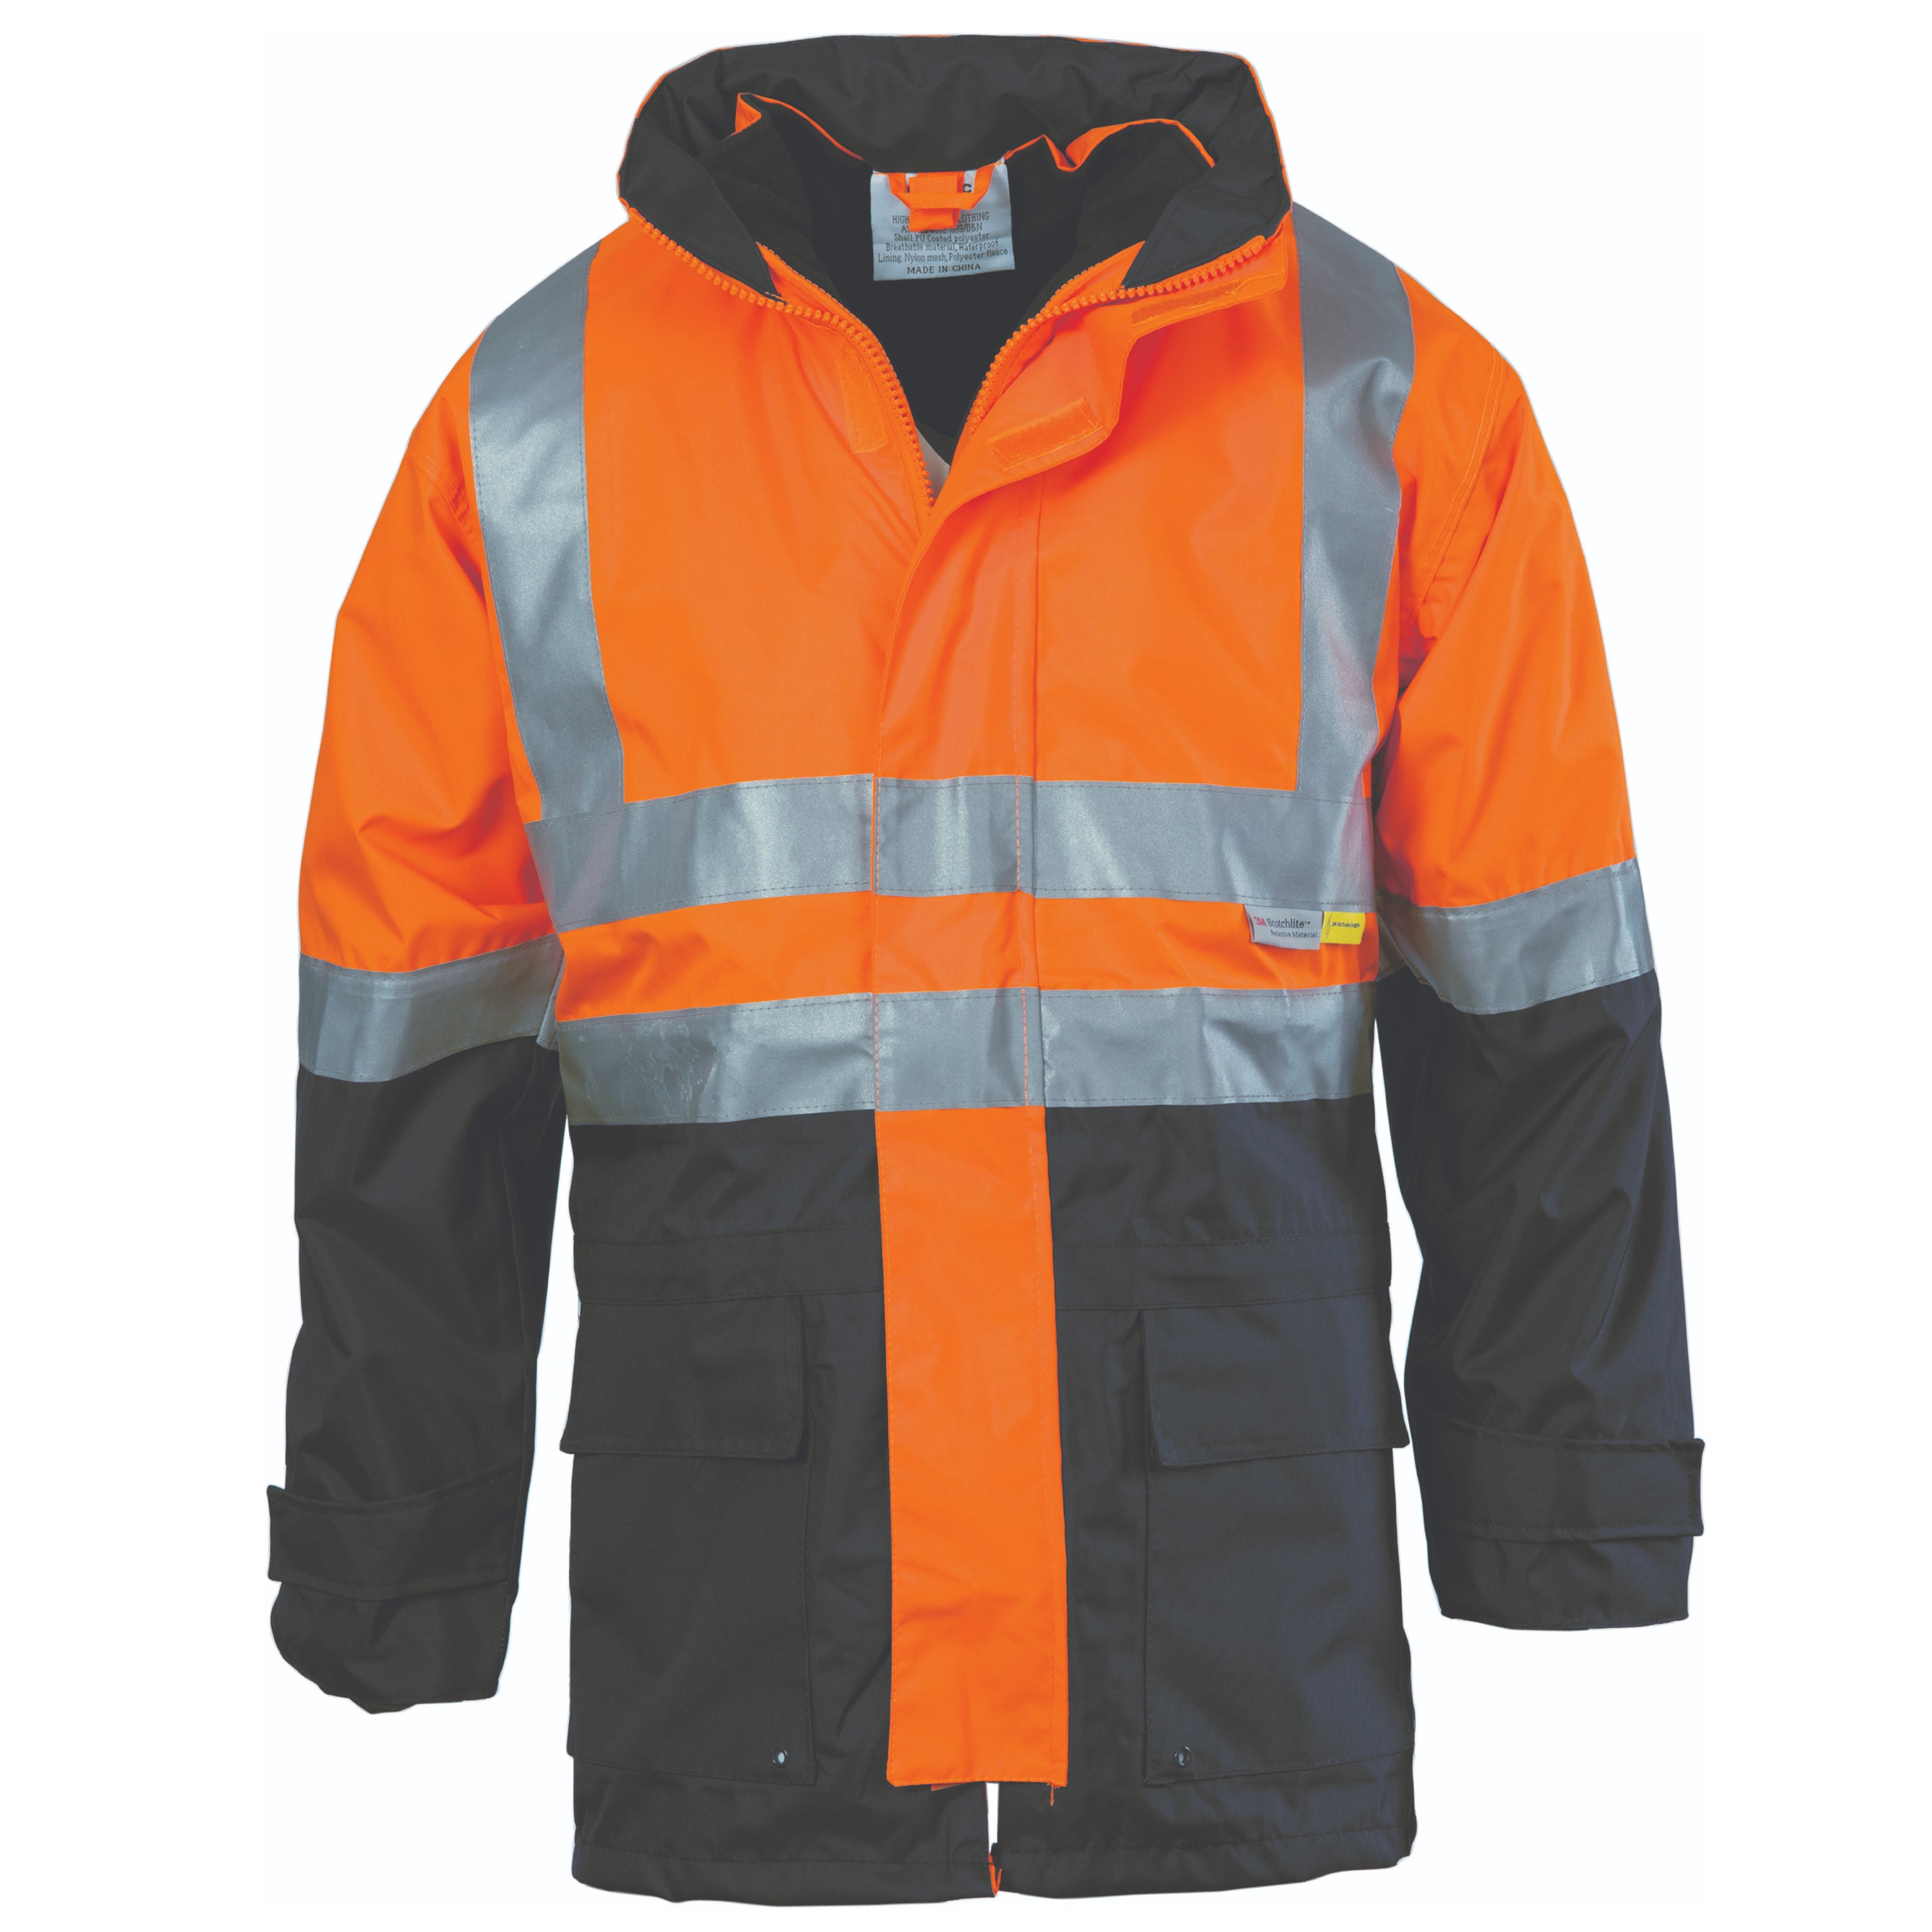 DNC - 3864 -  4 in 1 HiVis Two Tone Breathable Jacket with Vest and 3M Reflective Tape